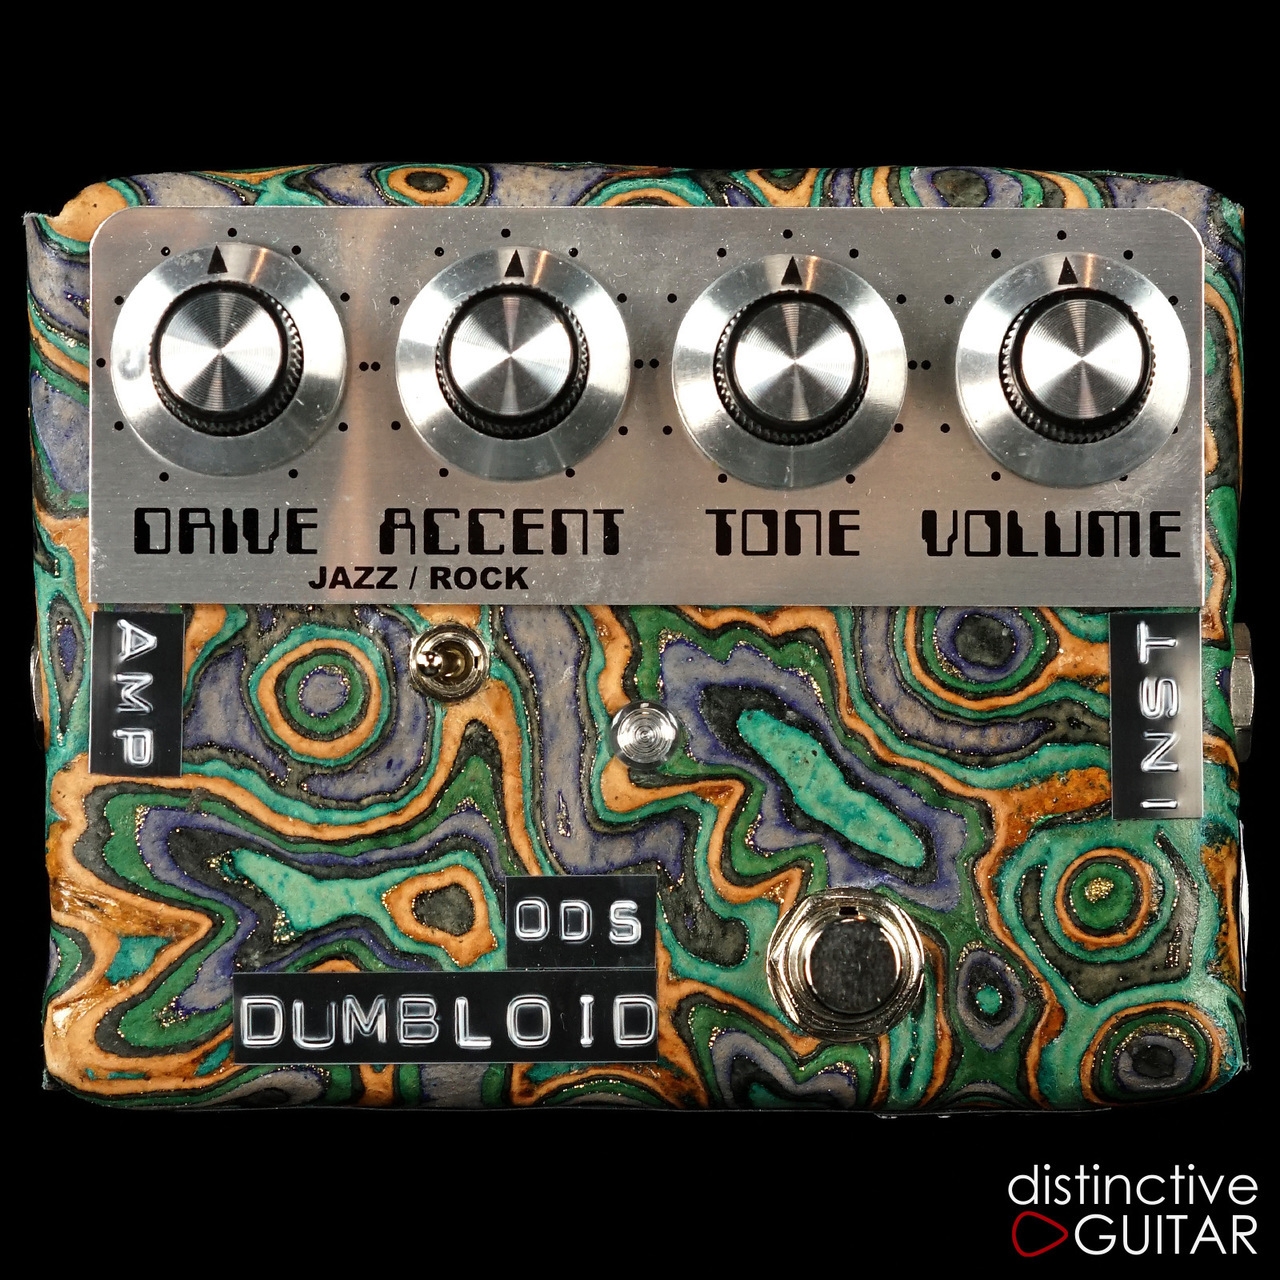 Shins Music Dumbloid ODS Overdrive Special Sukimo Leather Blue